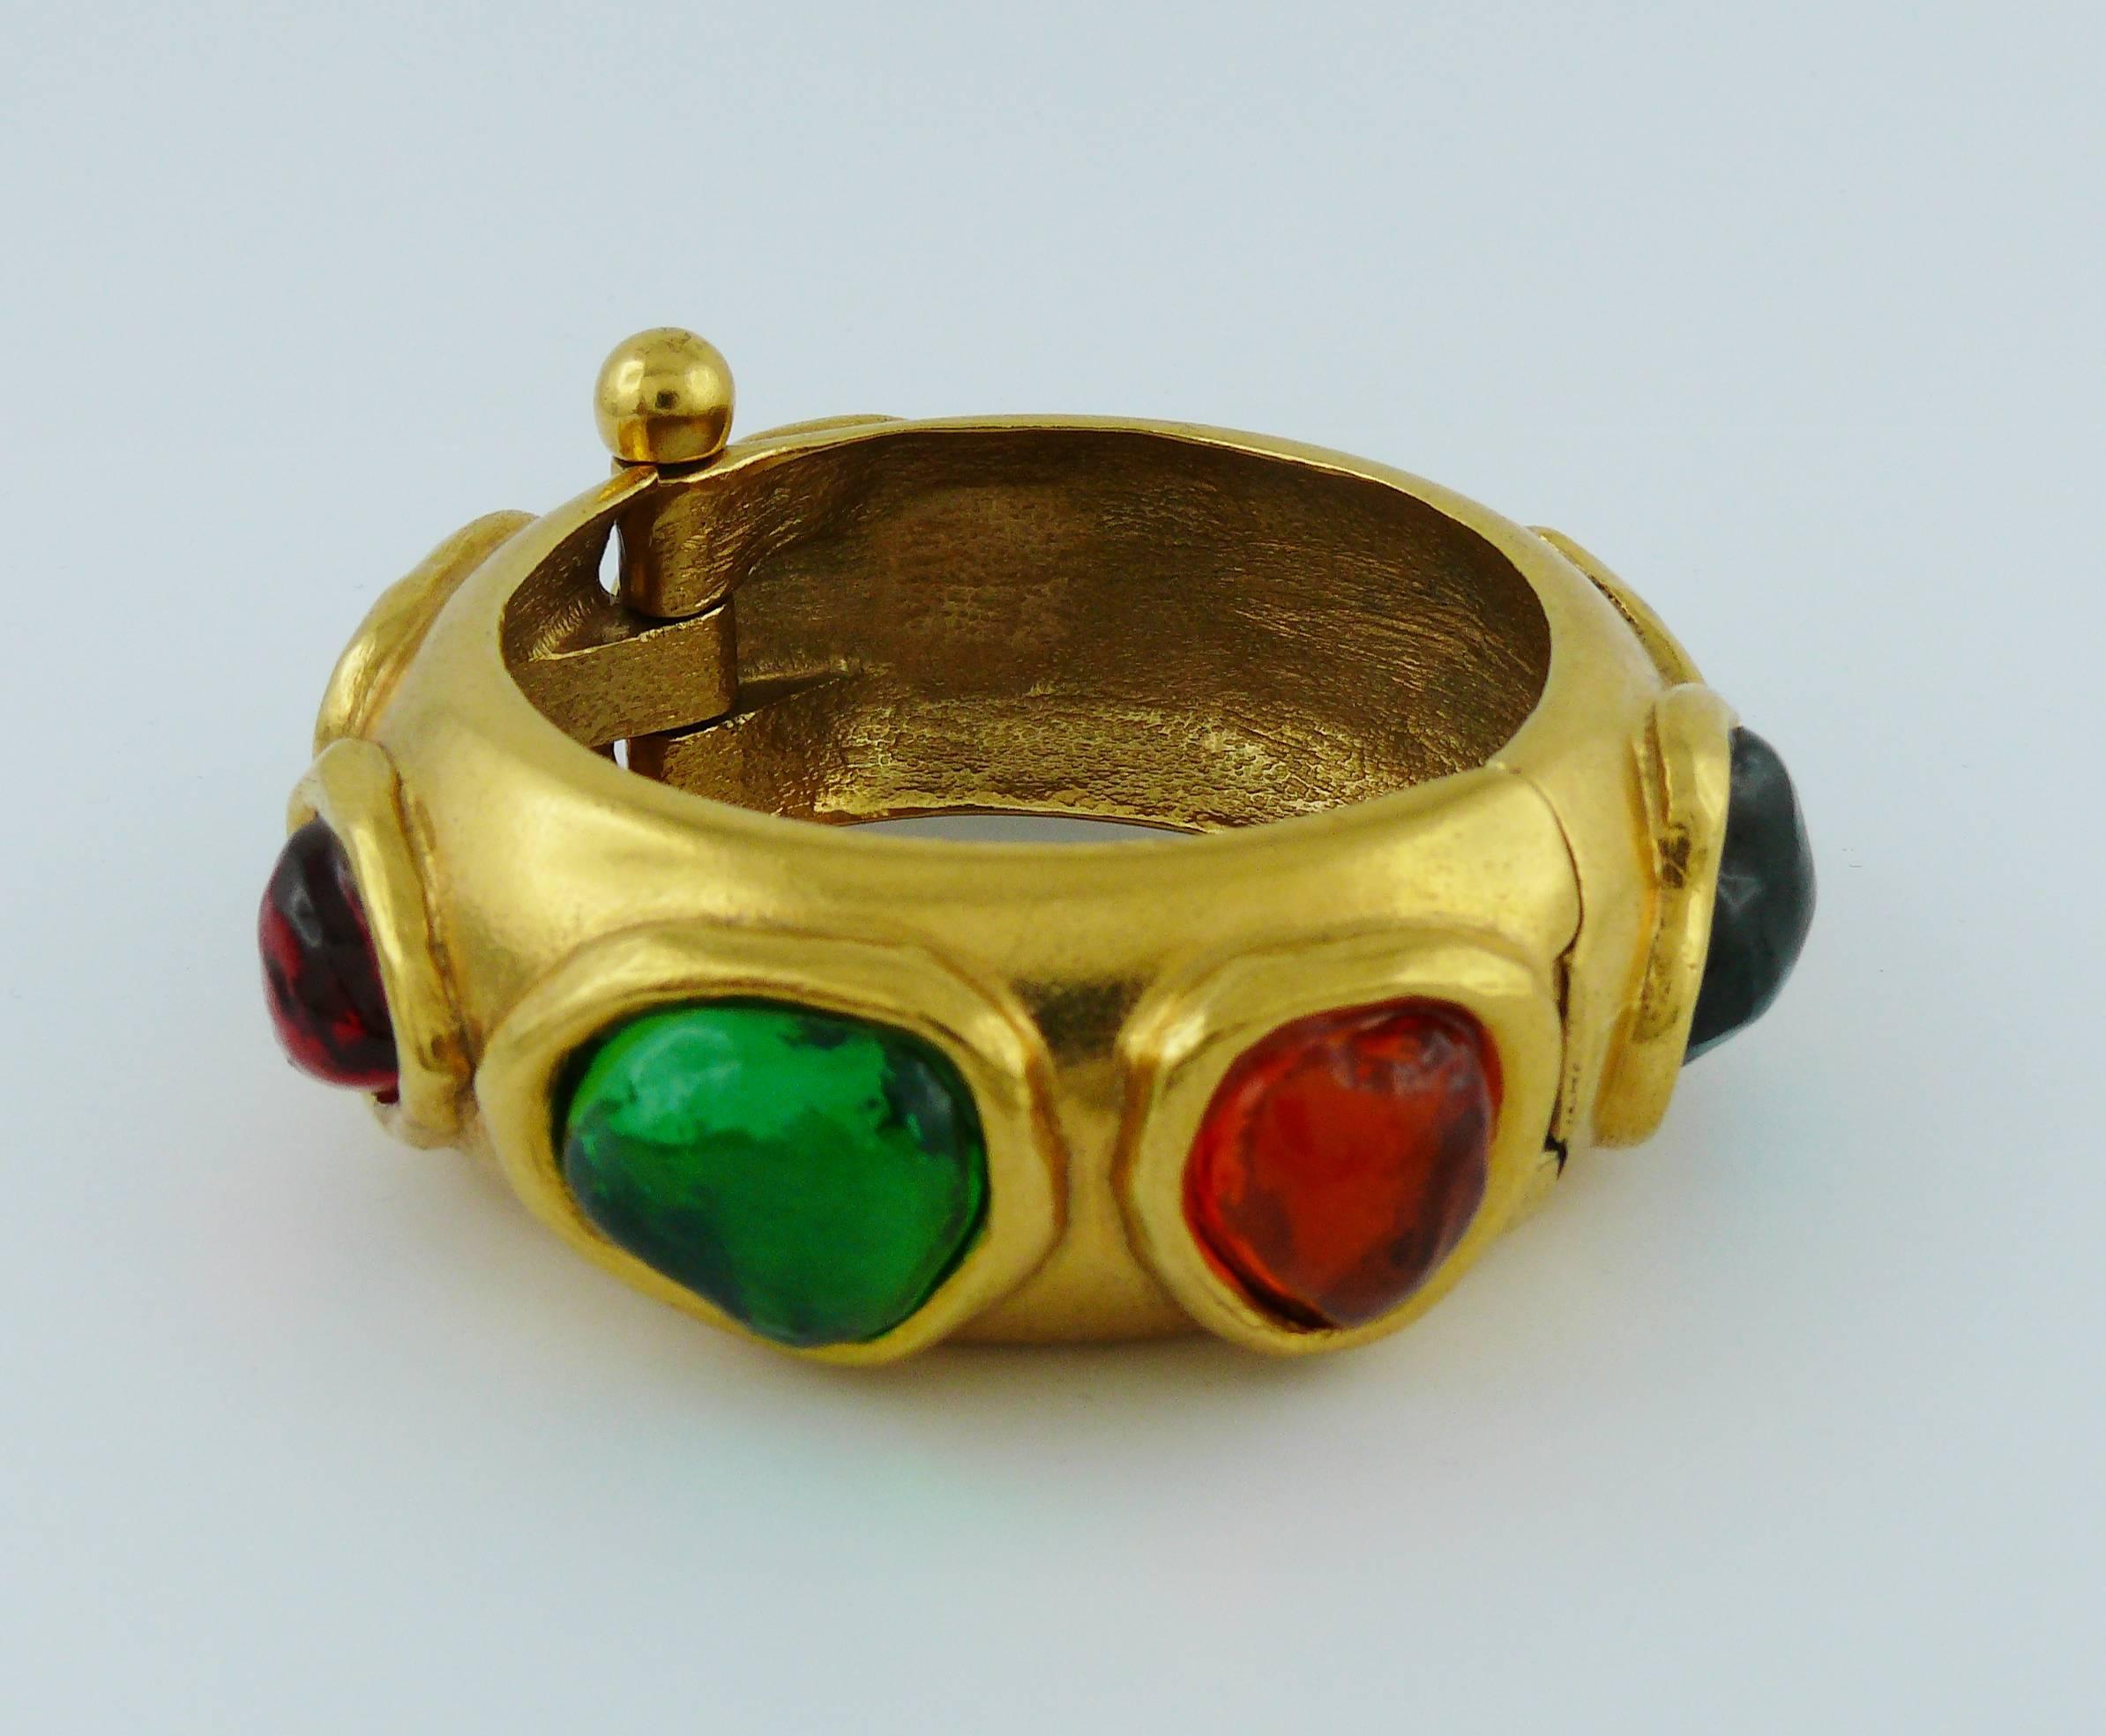 YVES SAINT LAURENT vintage cuff bracelet featuring large multicolored faux gemstone resin cabochons in a gold toned setting.

Embossed YSL Made in France.

Indicative measurements : inner circumference approx. 18.22 cm (7.17 inches) / width approx.